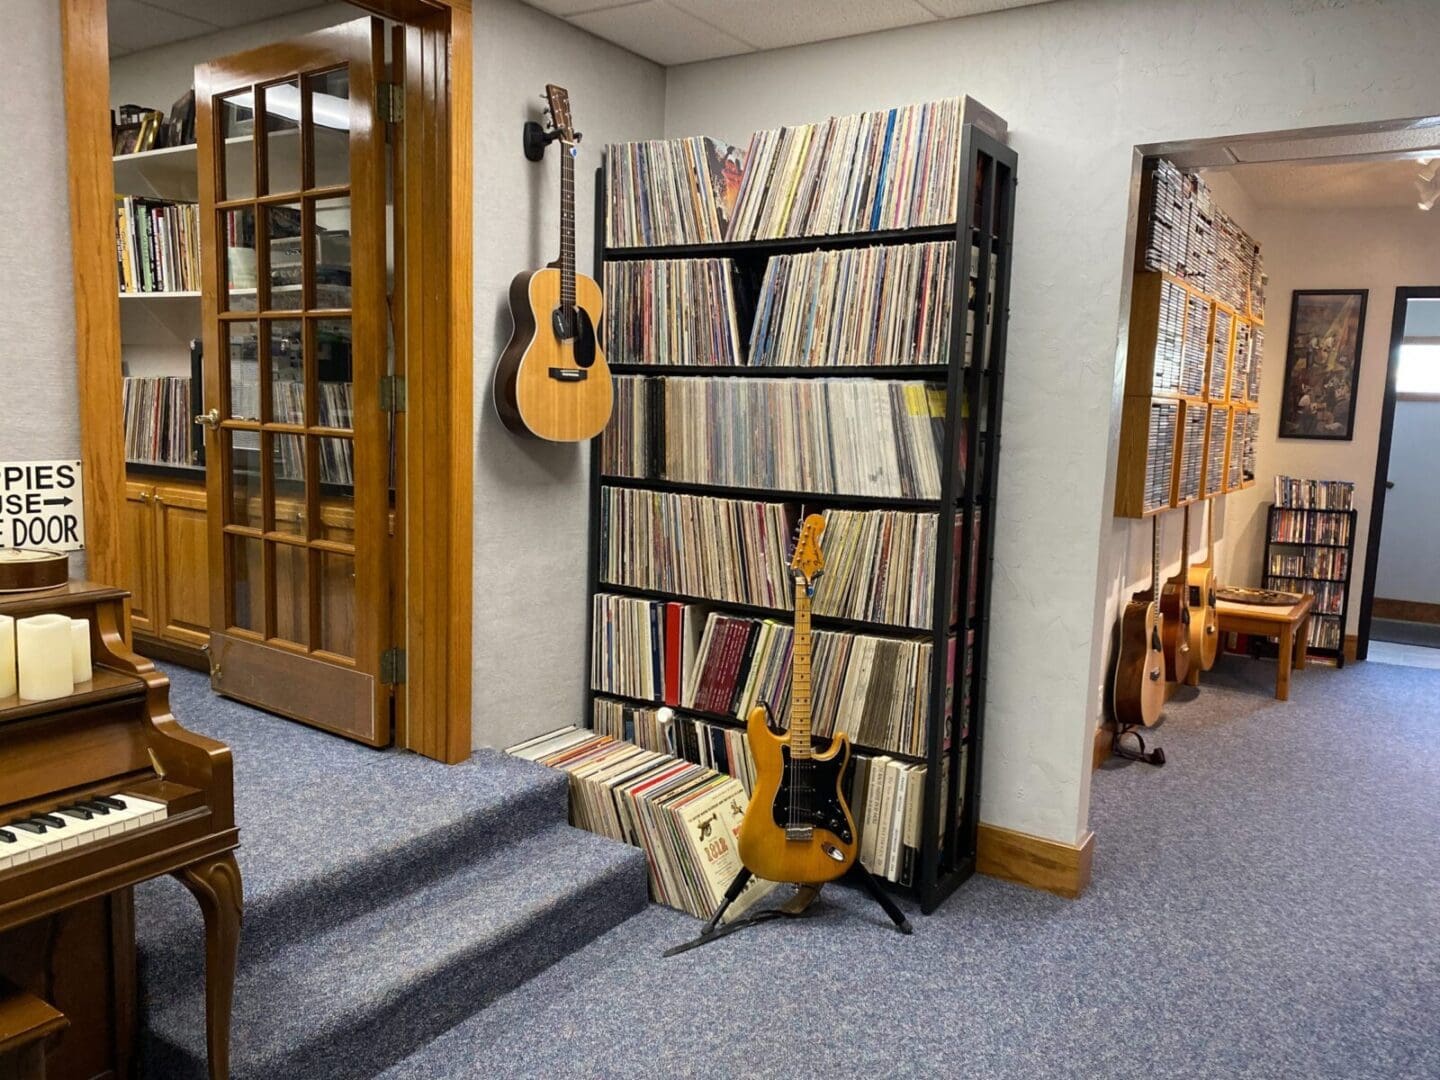 The Sound Station's music selection of CD'd and Vinyl